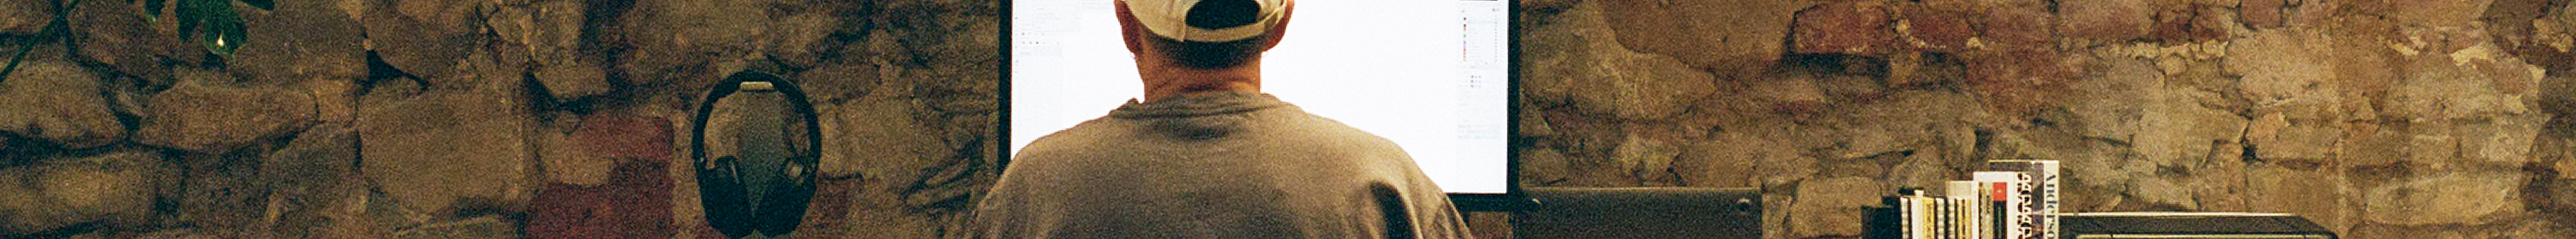 Christopher Chase's profile banner